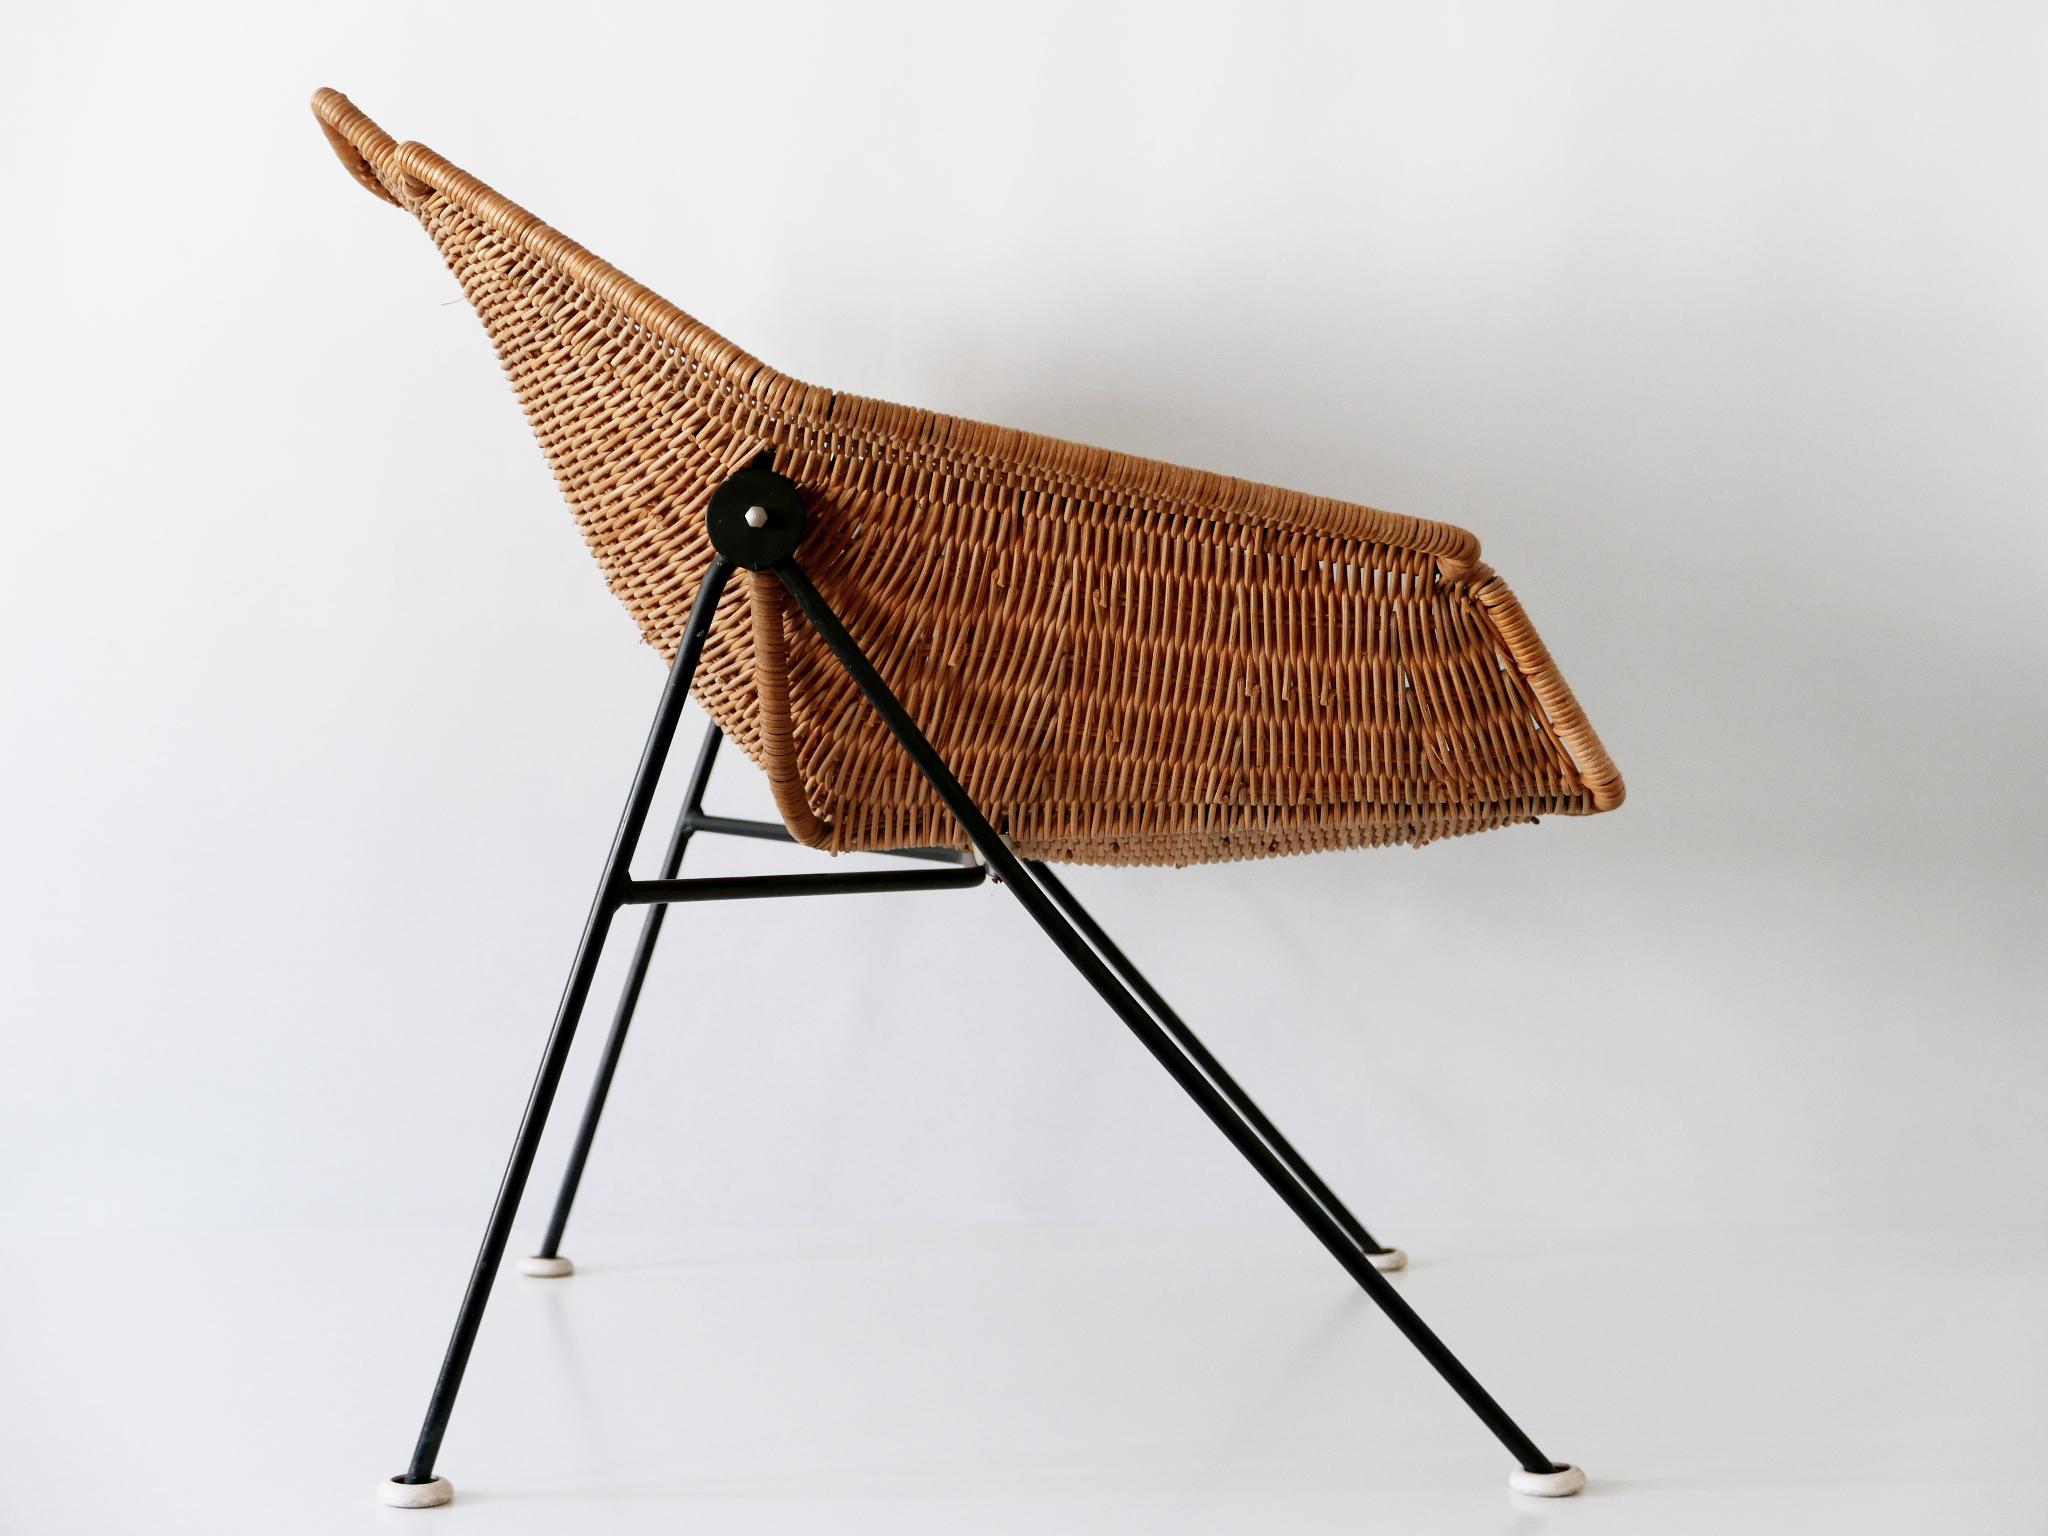 Exceptional Mid-Century Modern Wicker Lounge Chair or Armchair 1950s Sweden For Sale 8